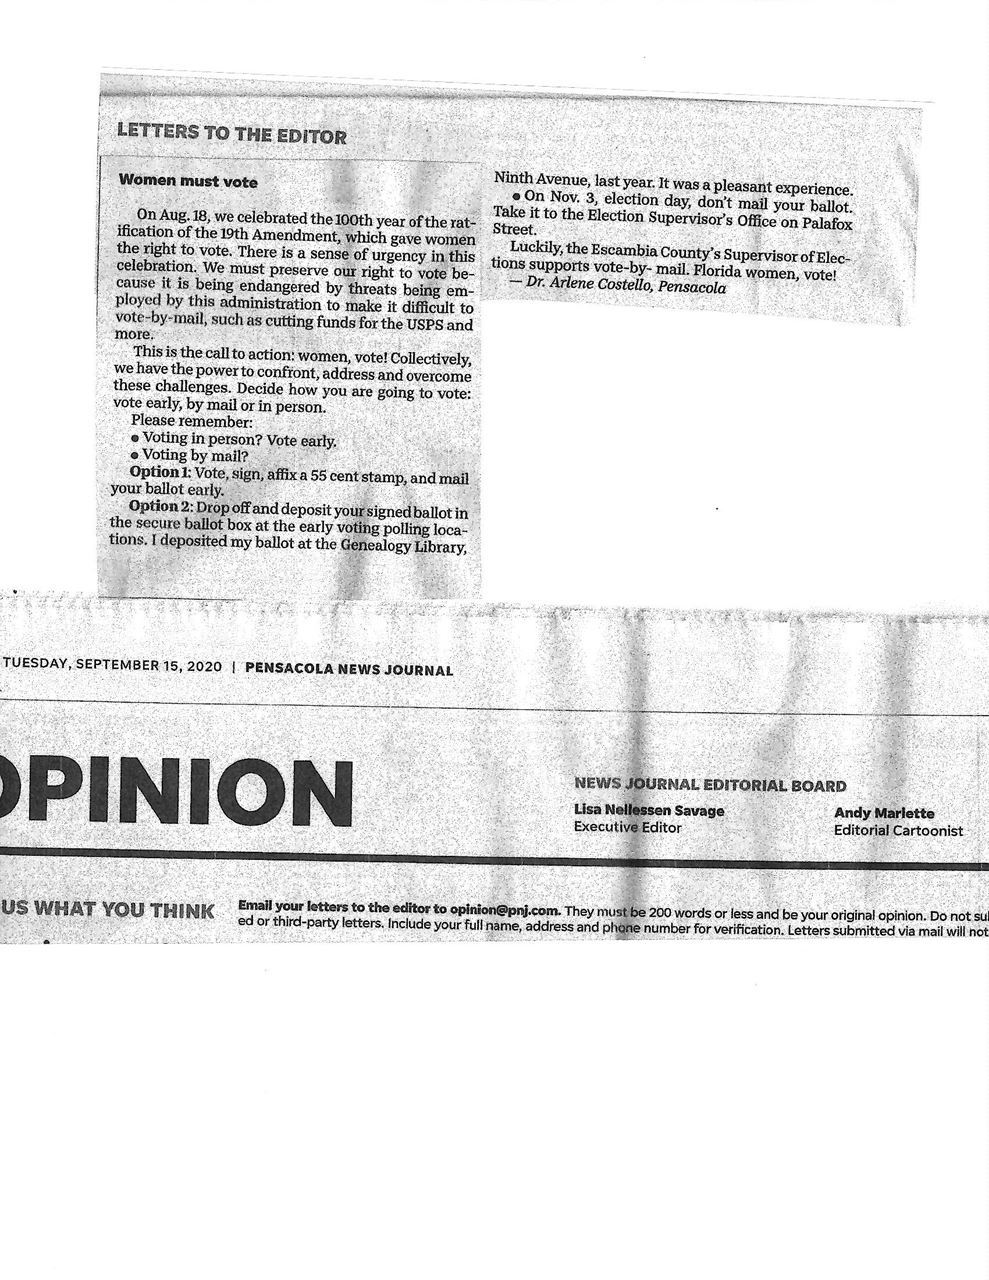 Image of a letter to the editor that appeared in the Pensacola New Journal newspaper on Sept. 15, 2020. The letter is titled Women Must Vote and was written by Dr. Arlene Costello.